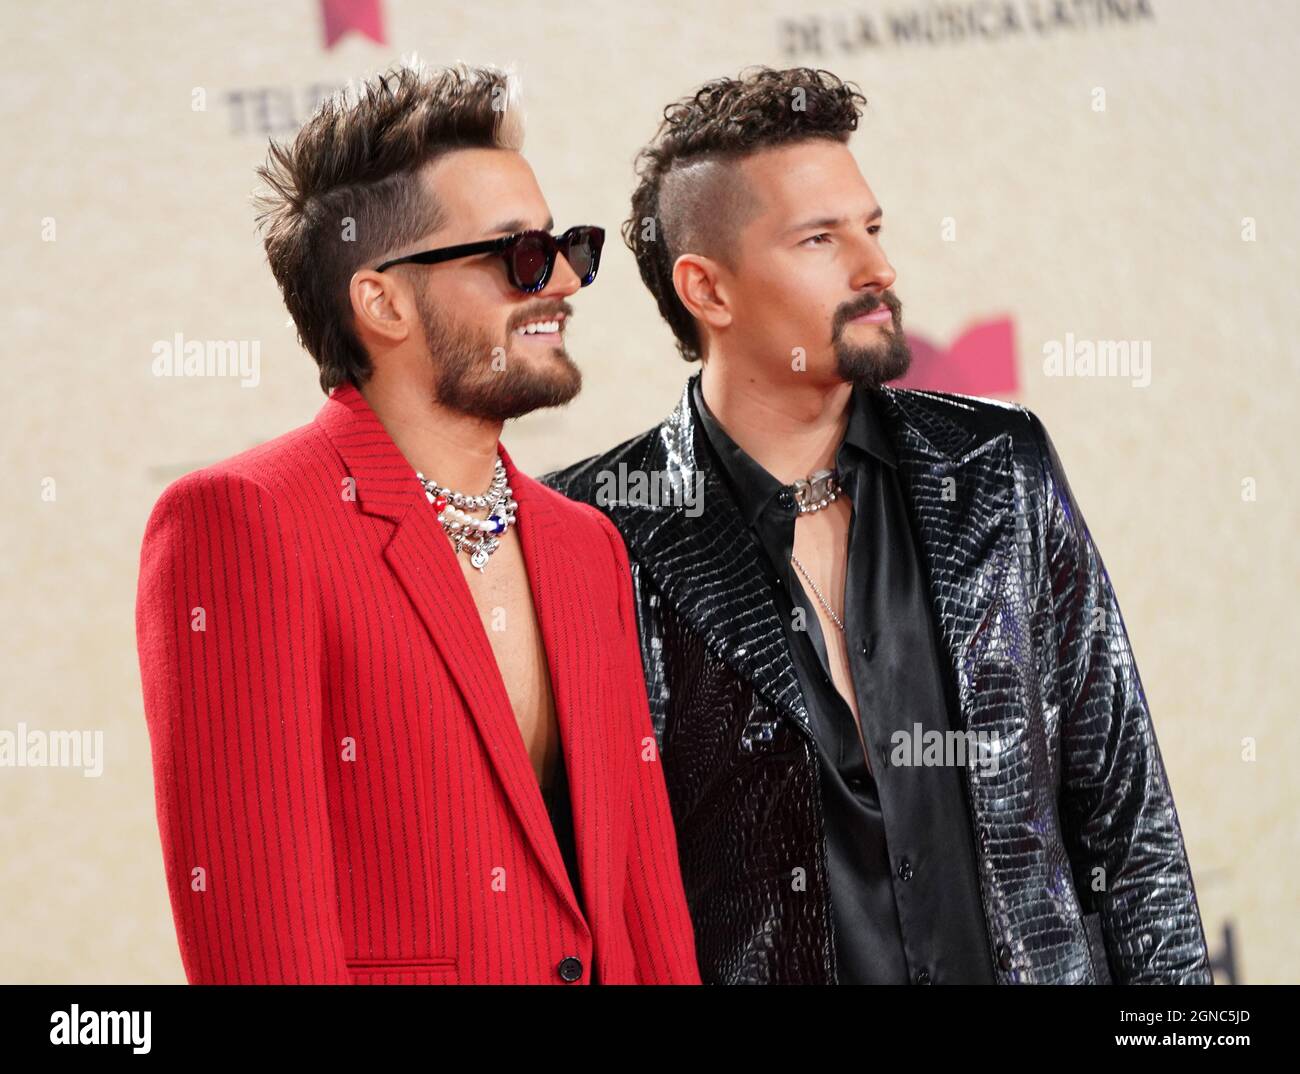 PREMIOS BILLBOARD DE LA MÚSICA LATINA 2021 —Mau y Ricky are seen  on the red carpet at the Watsco Center in Coral Gables, FL on September 23, 2021  (Photo by Alberto E. Tamargo/Sipa USA) Stock Photo